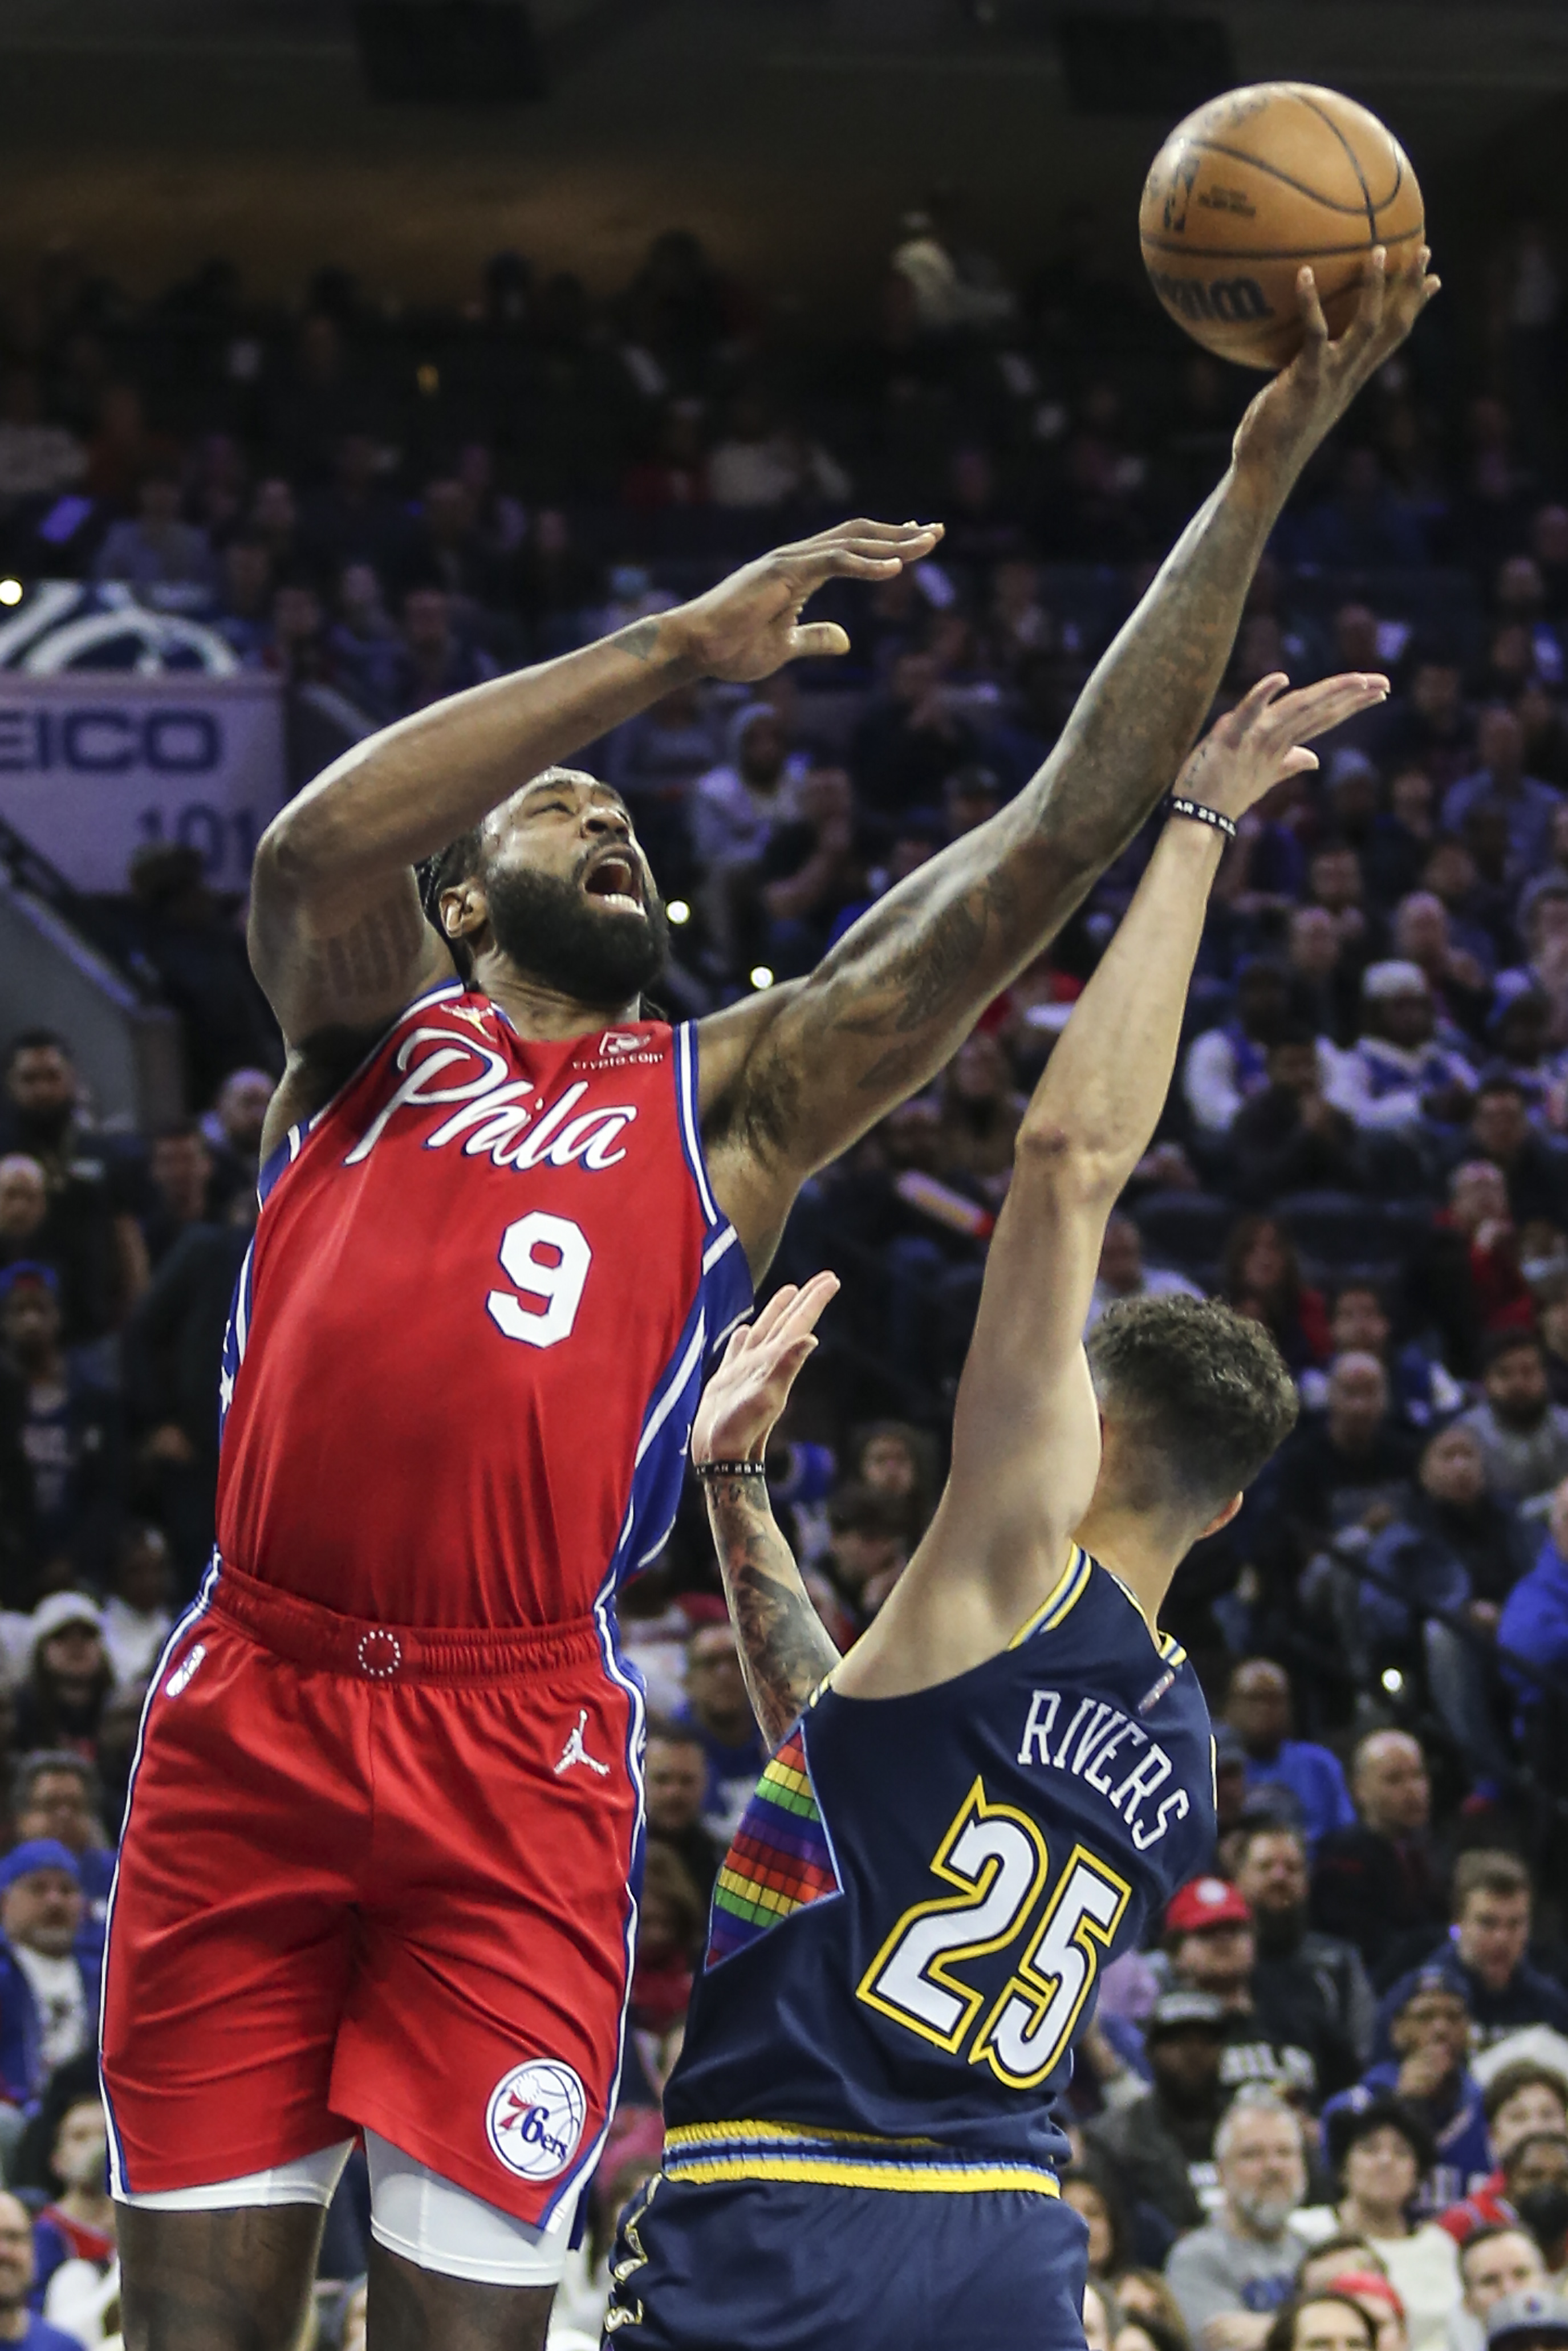 Sixers' Joel Embiid outplayed Nikola Jokic, but NBA MVP might be his only  trophy